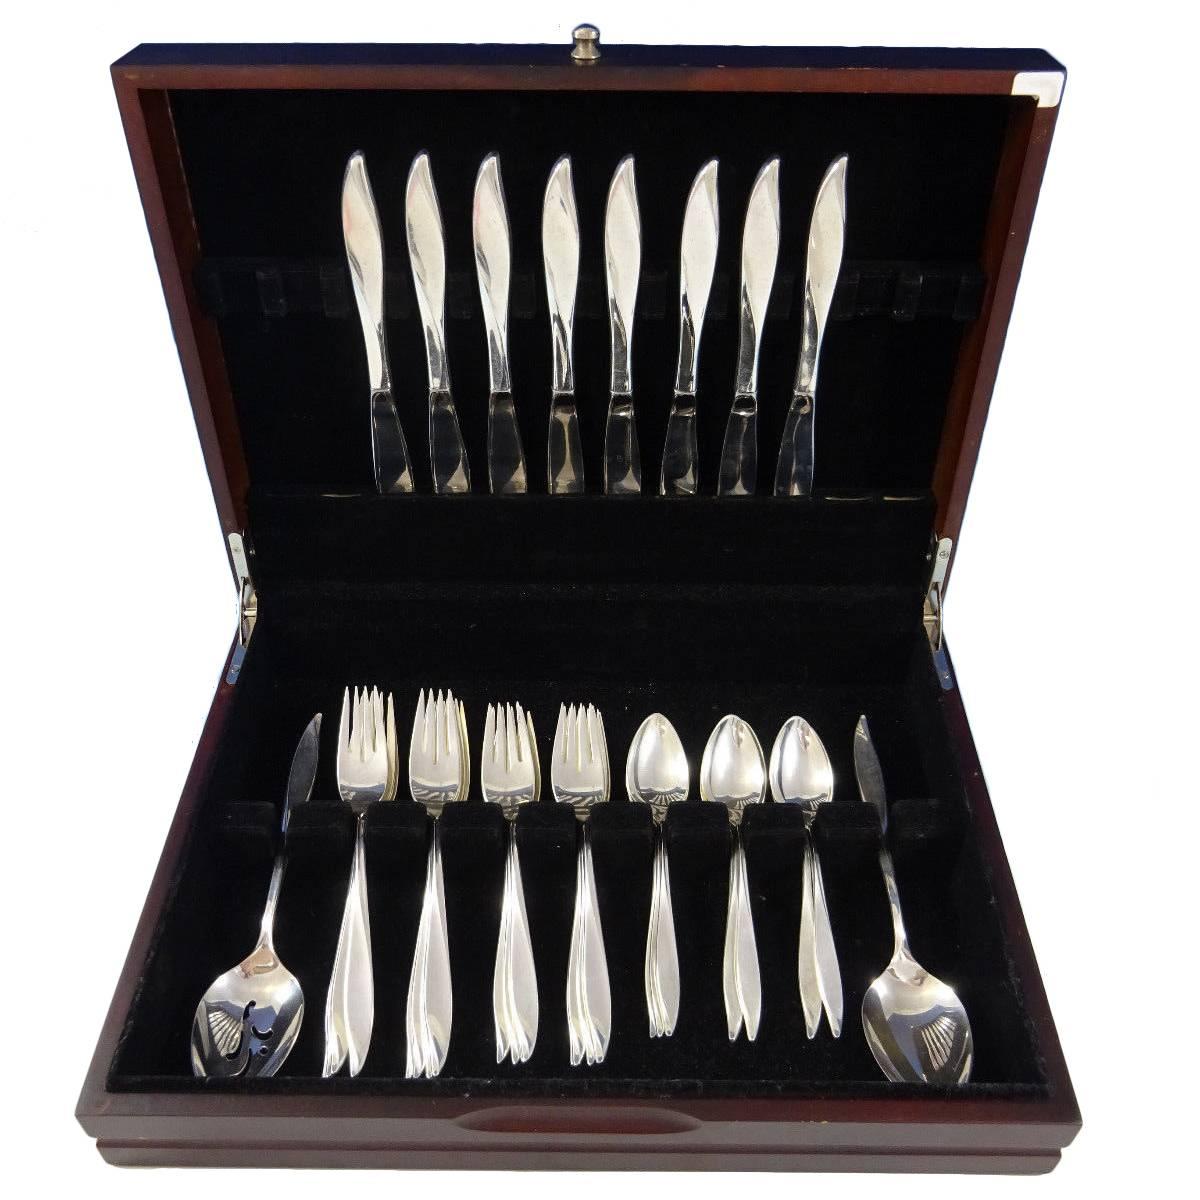 Vivant by Oneida sterling silver flatware set of 34 pieces. This set includes: 

Eight knives, 9